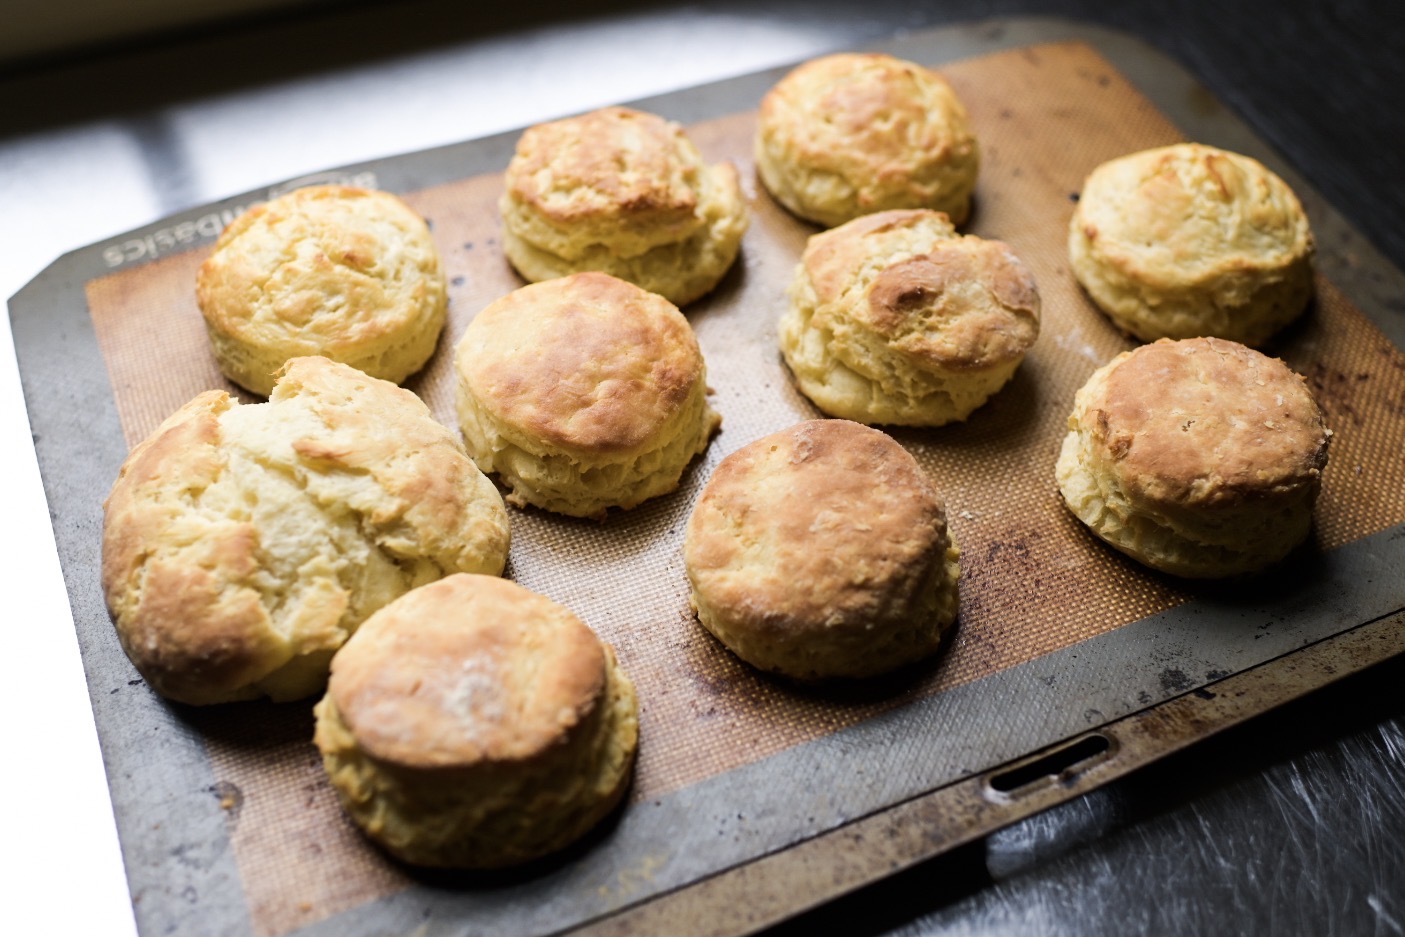 Buttermilk biscuits, recipe from Carla Hall's Soul Food